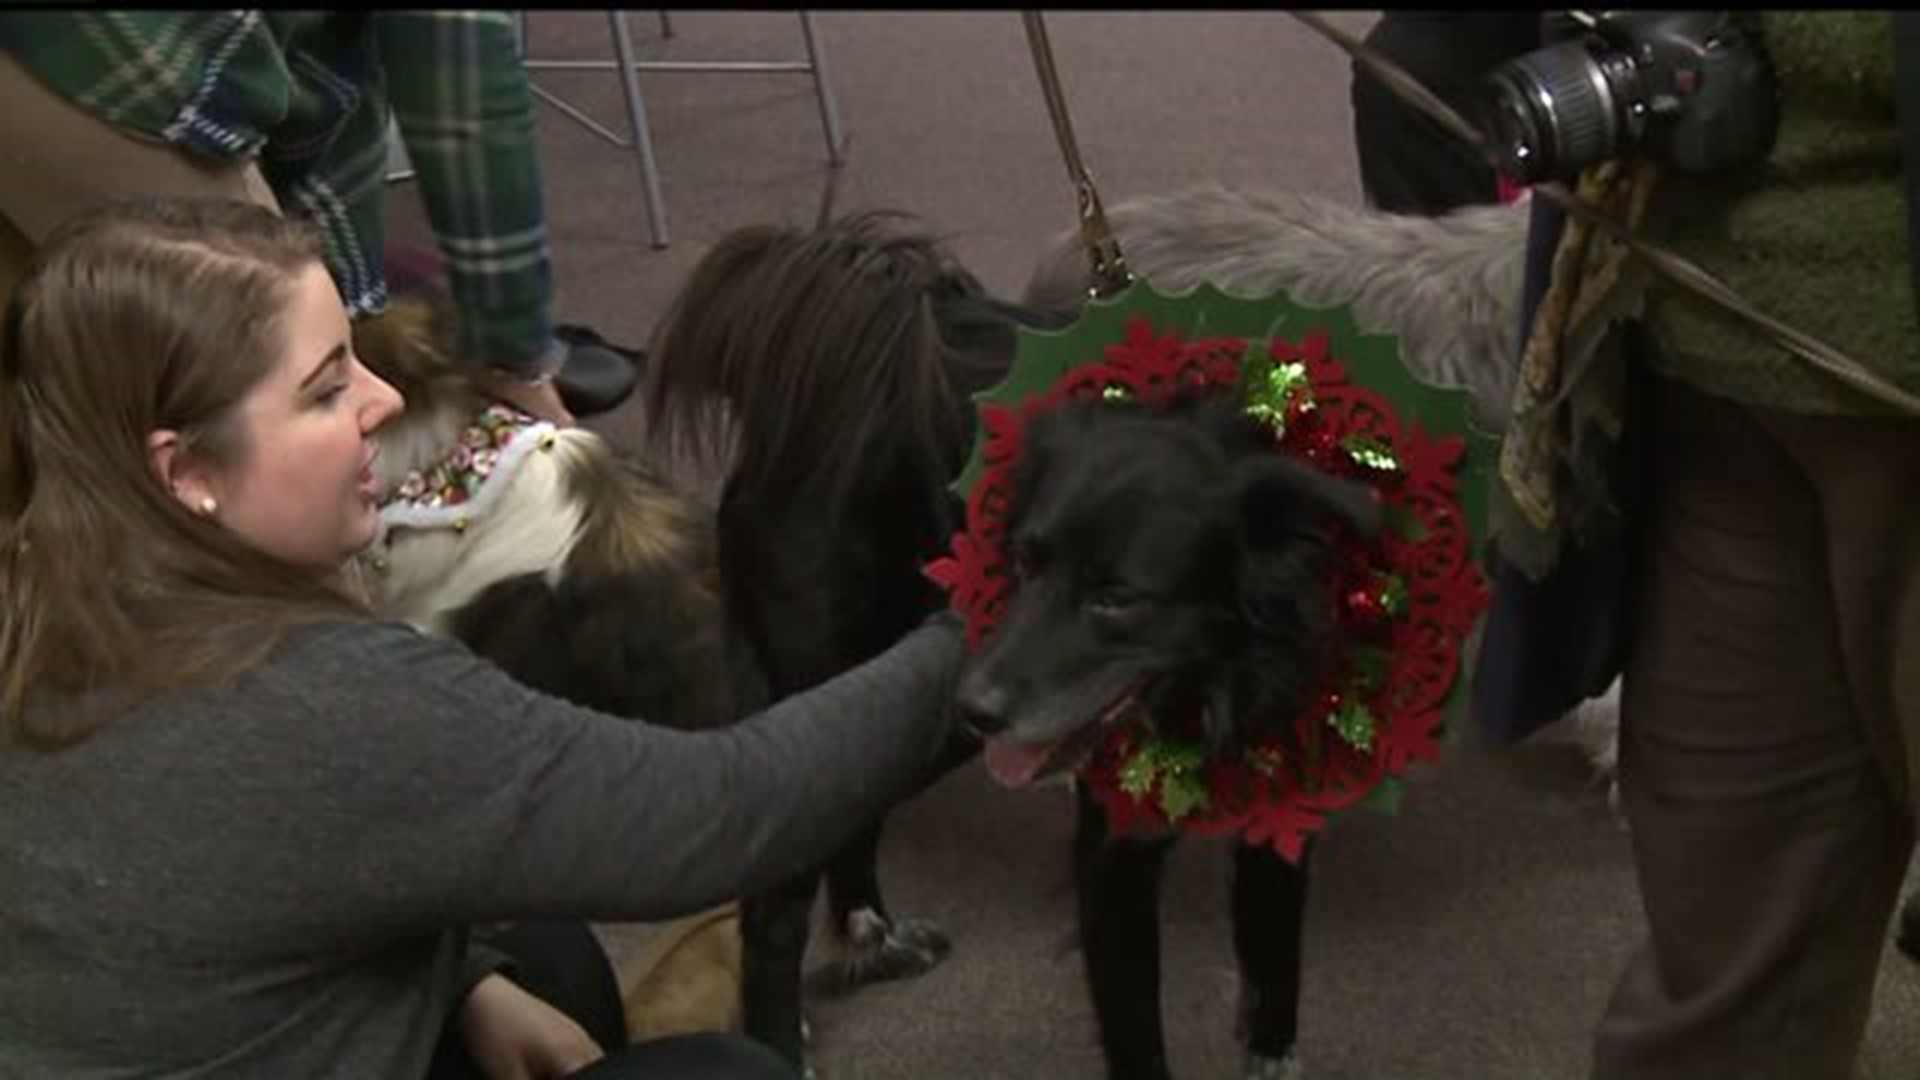 Therapy pets visit law students to de-stress from final exams